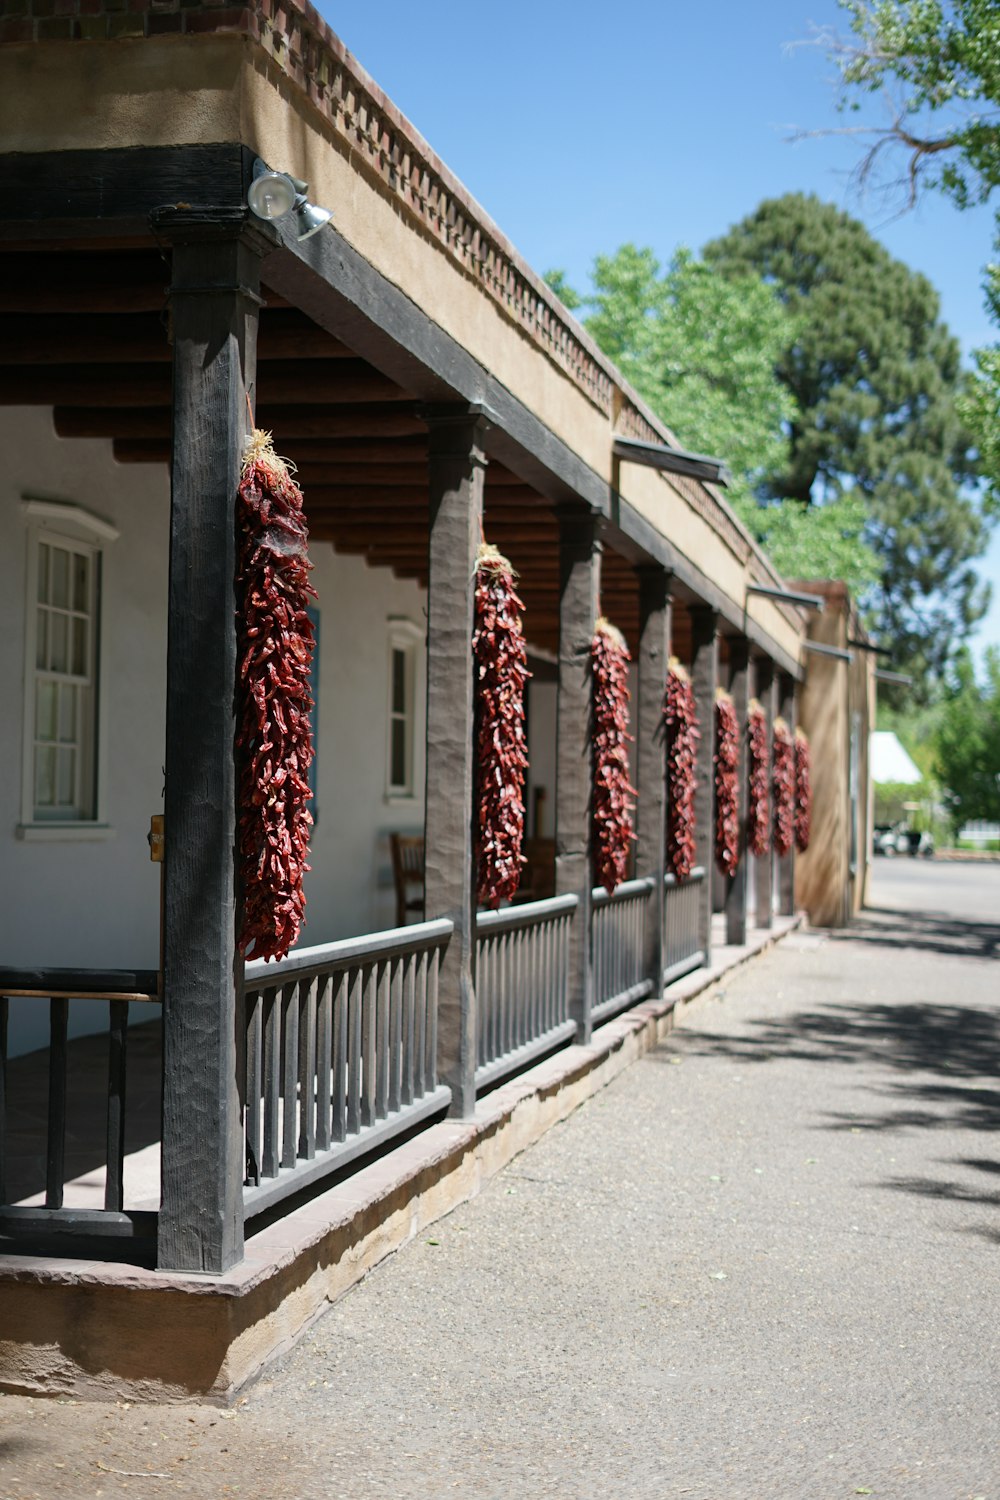 a row of red peppers hanging from the side of a building